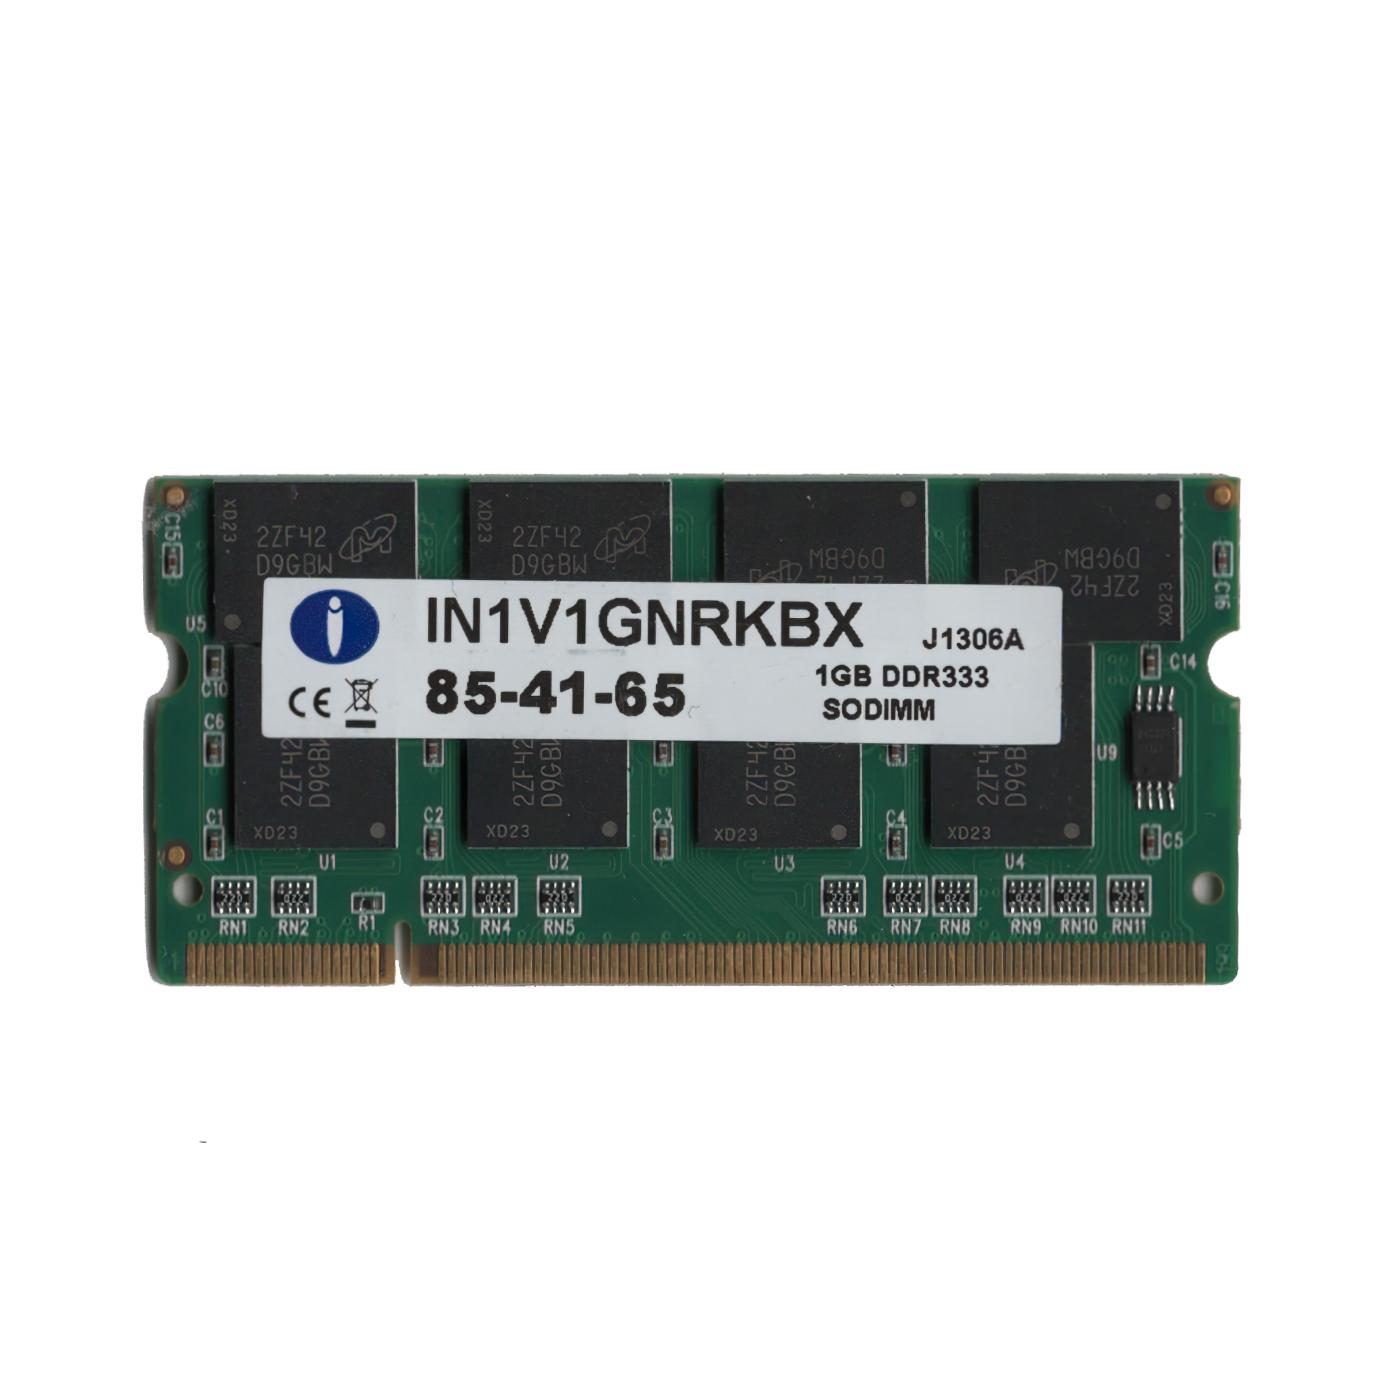 Preowned INTEGRAL IN1V1GNRKBX J1306A 1GB DDR333 SODIMM Memory Module (Untested)